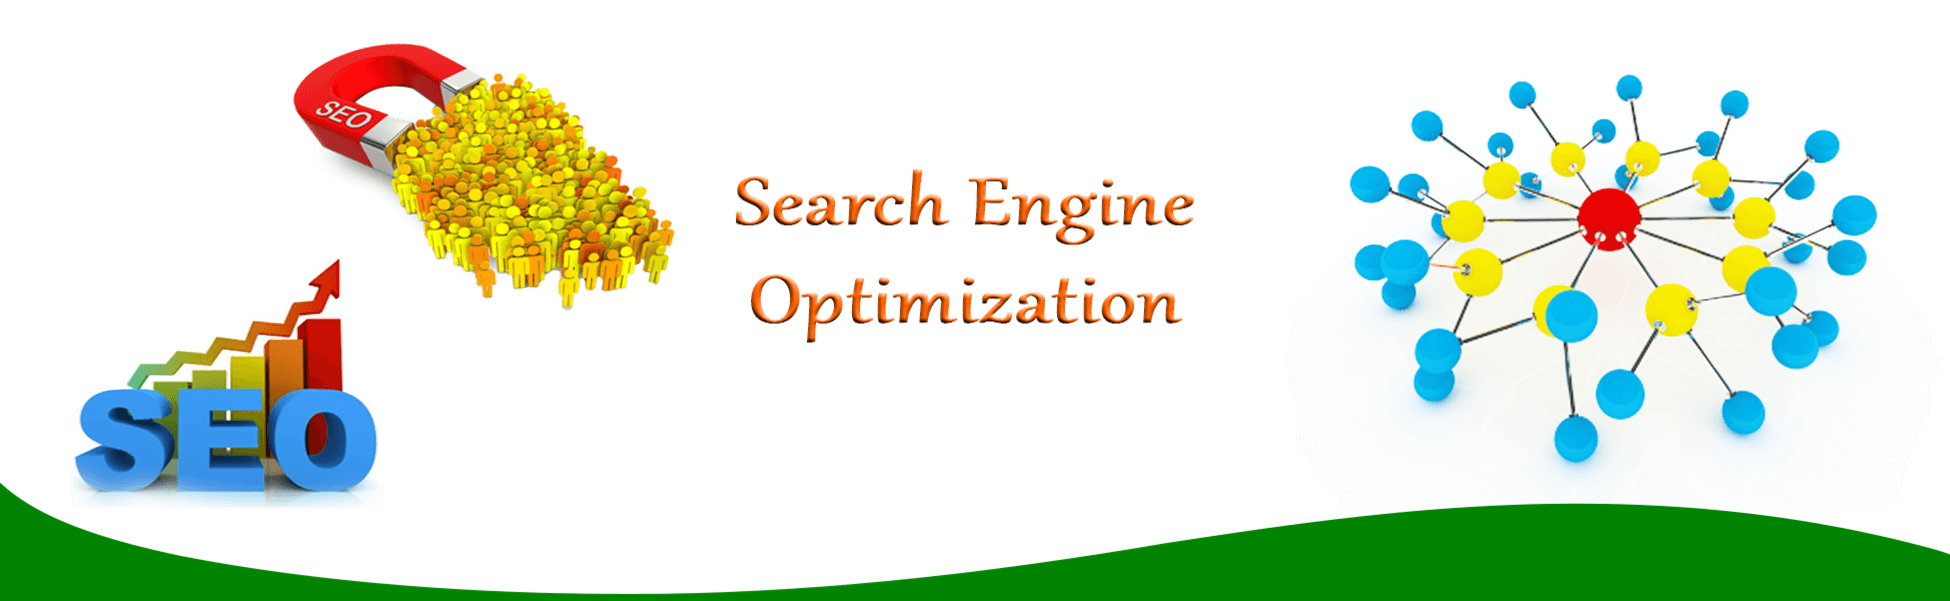 Low Cost SEO Services | Affordable Search Engine Optimization